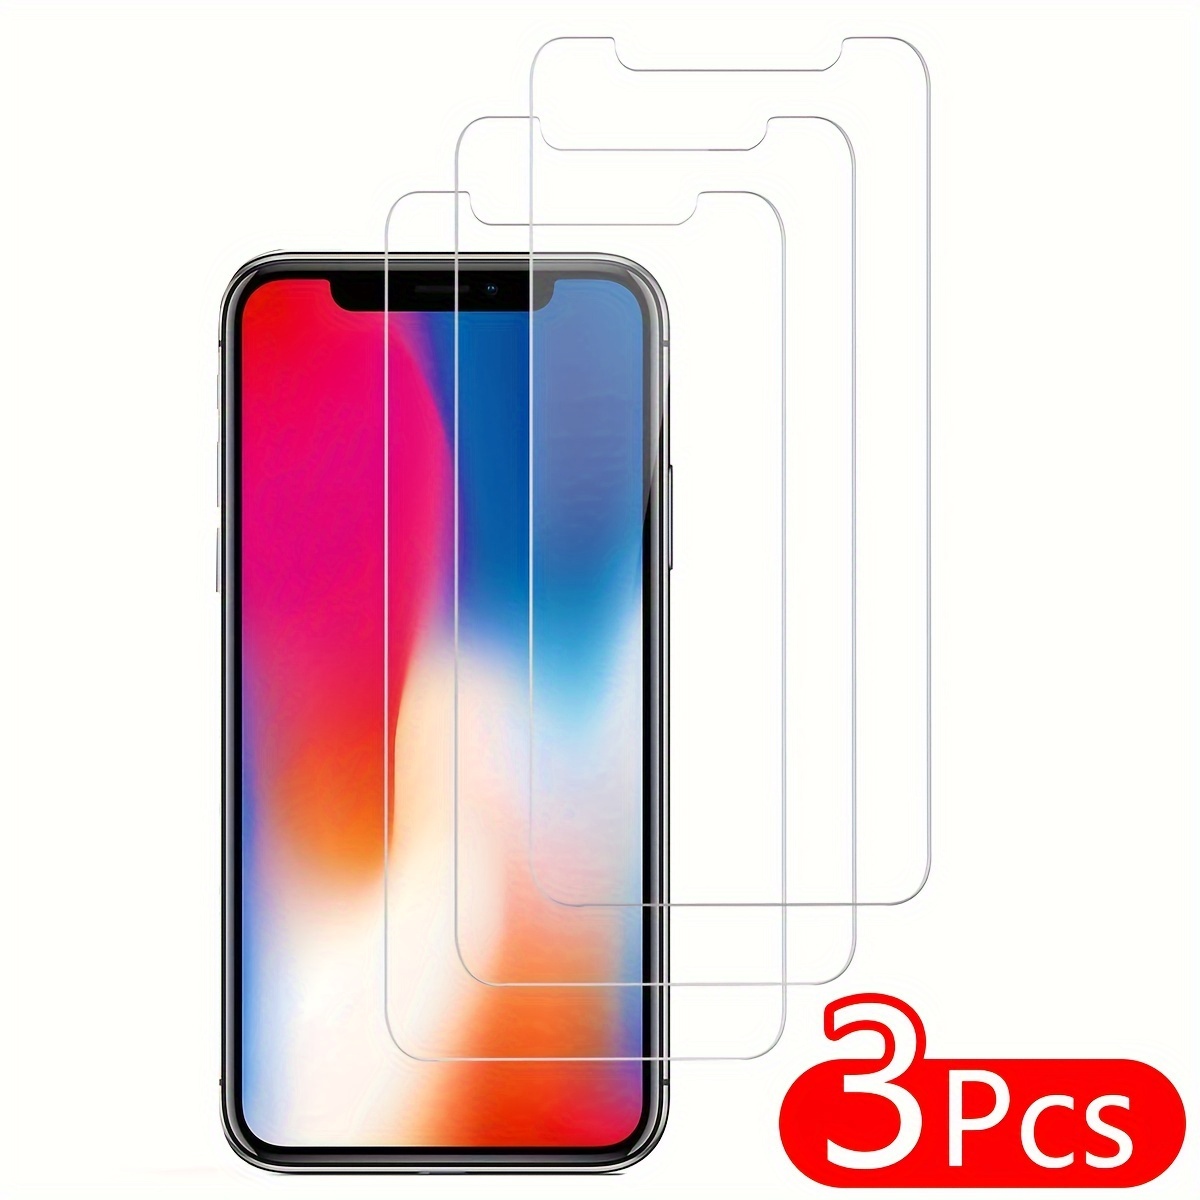 

3-pack Tempered Glass Screen Protectors For 11, 12, 13, 14, 15 Pro Max, 7/8/se2, X/xs, Xr - High Transparency, Scratch-resistant, Bubble-free, 9h Hardness, Glossy Surface